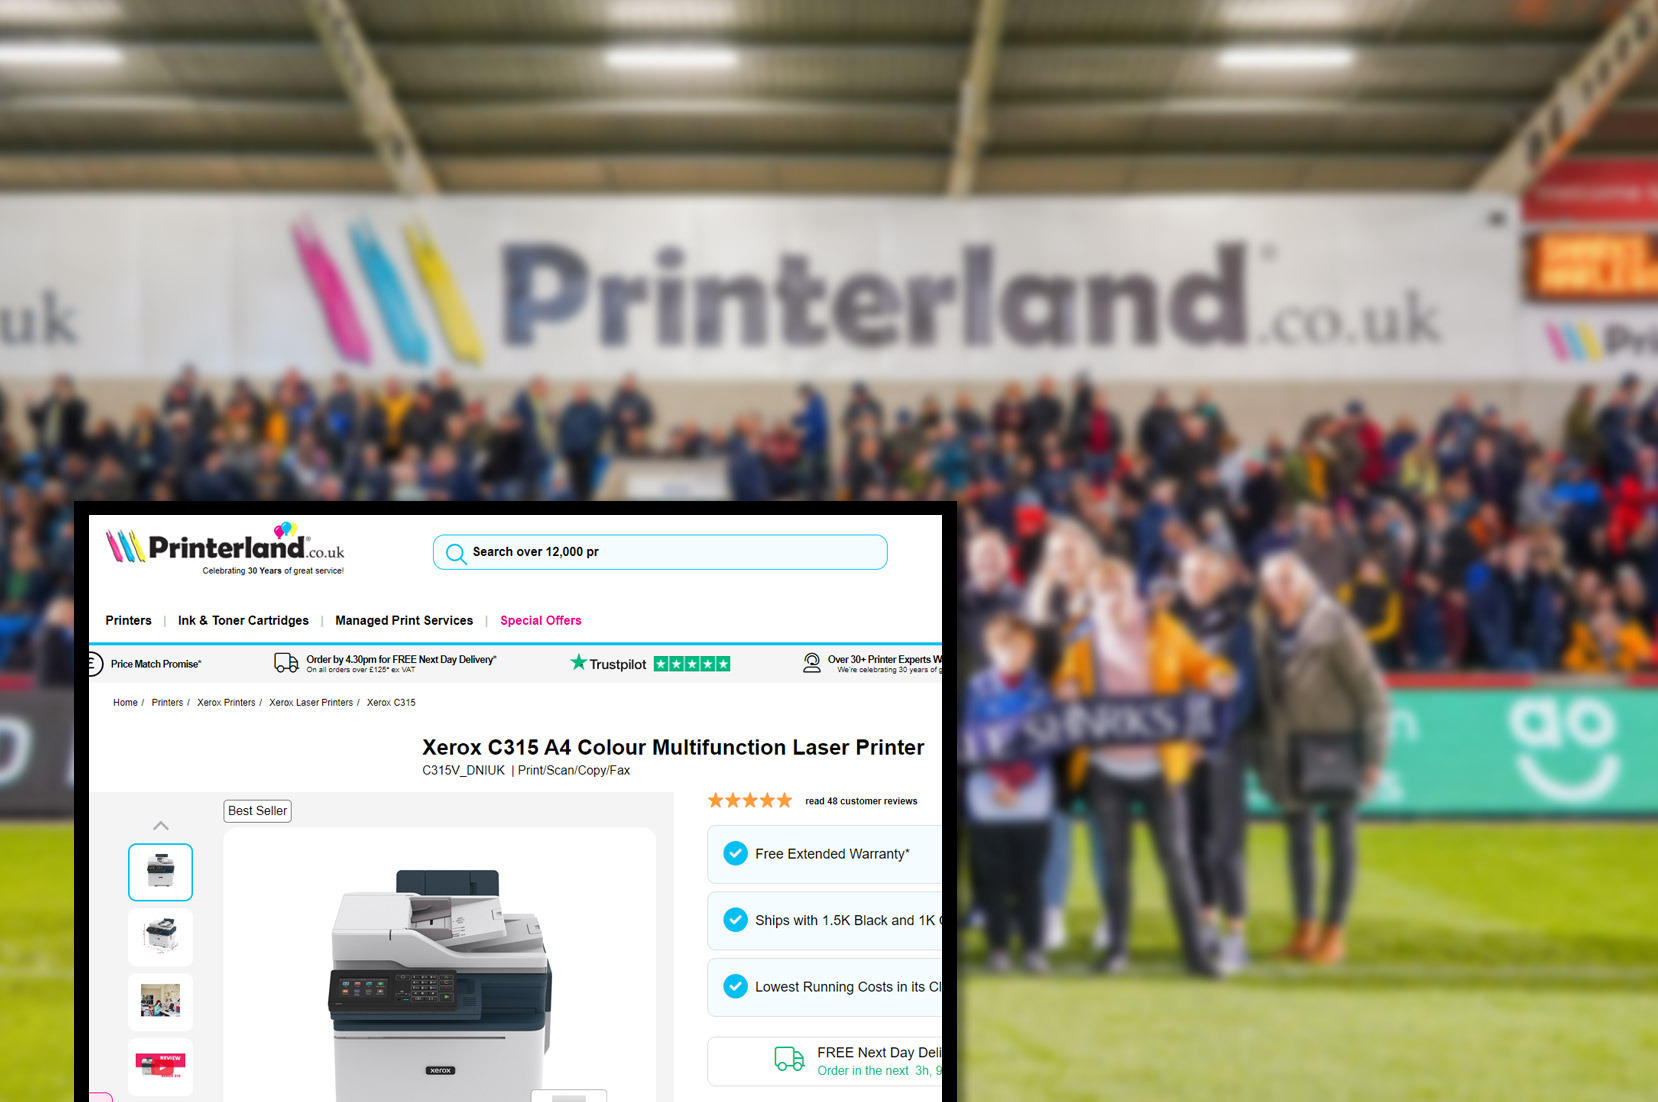 printers-printerland-co-ukproduct-pricing-information-and-image-scraping-services